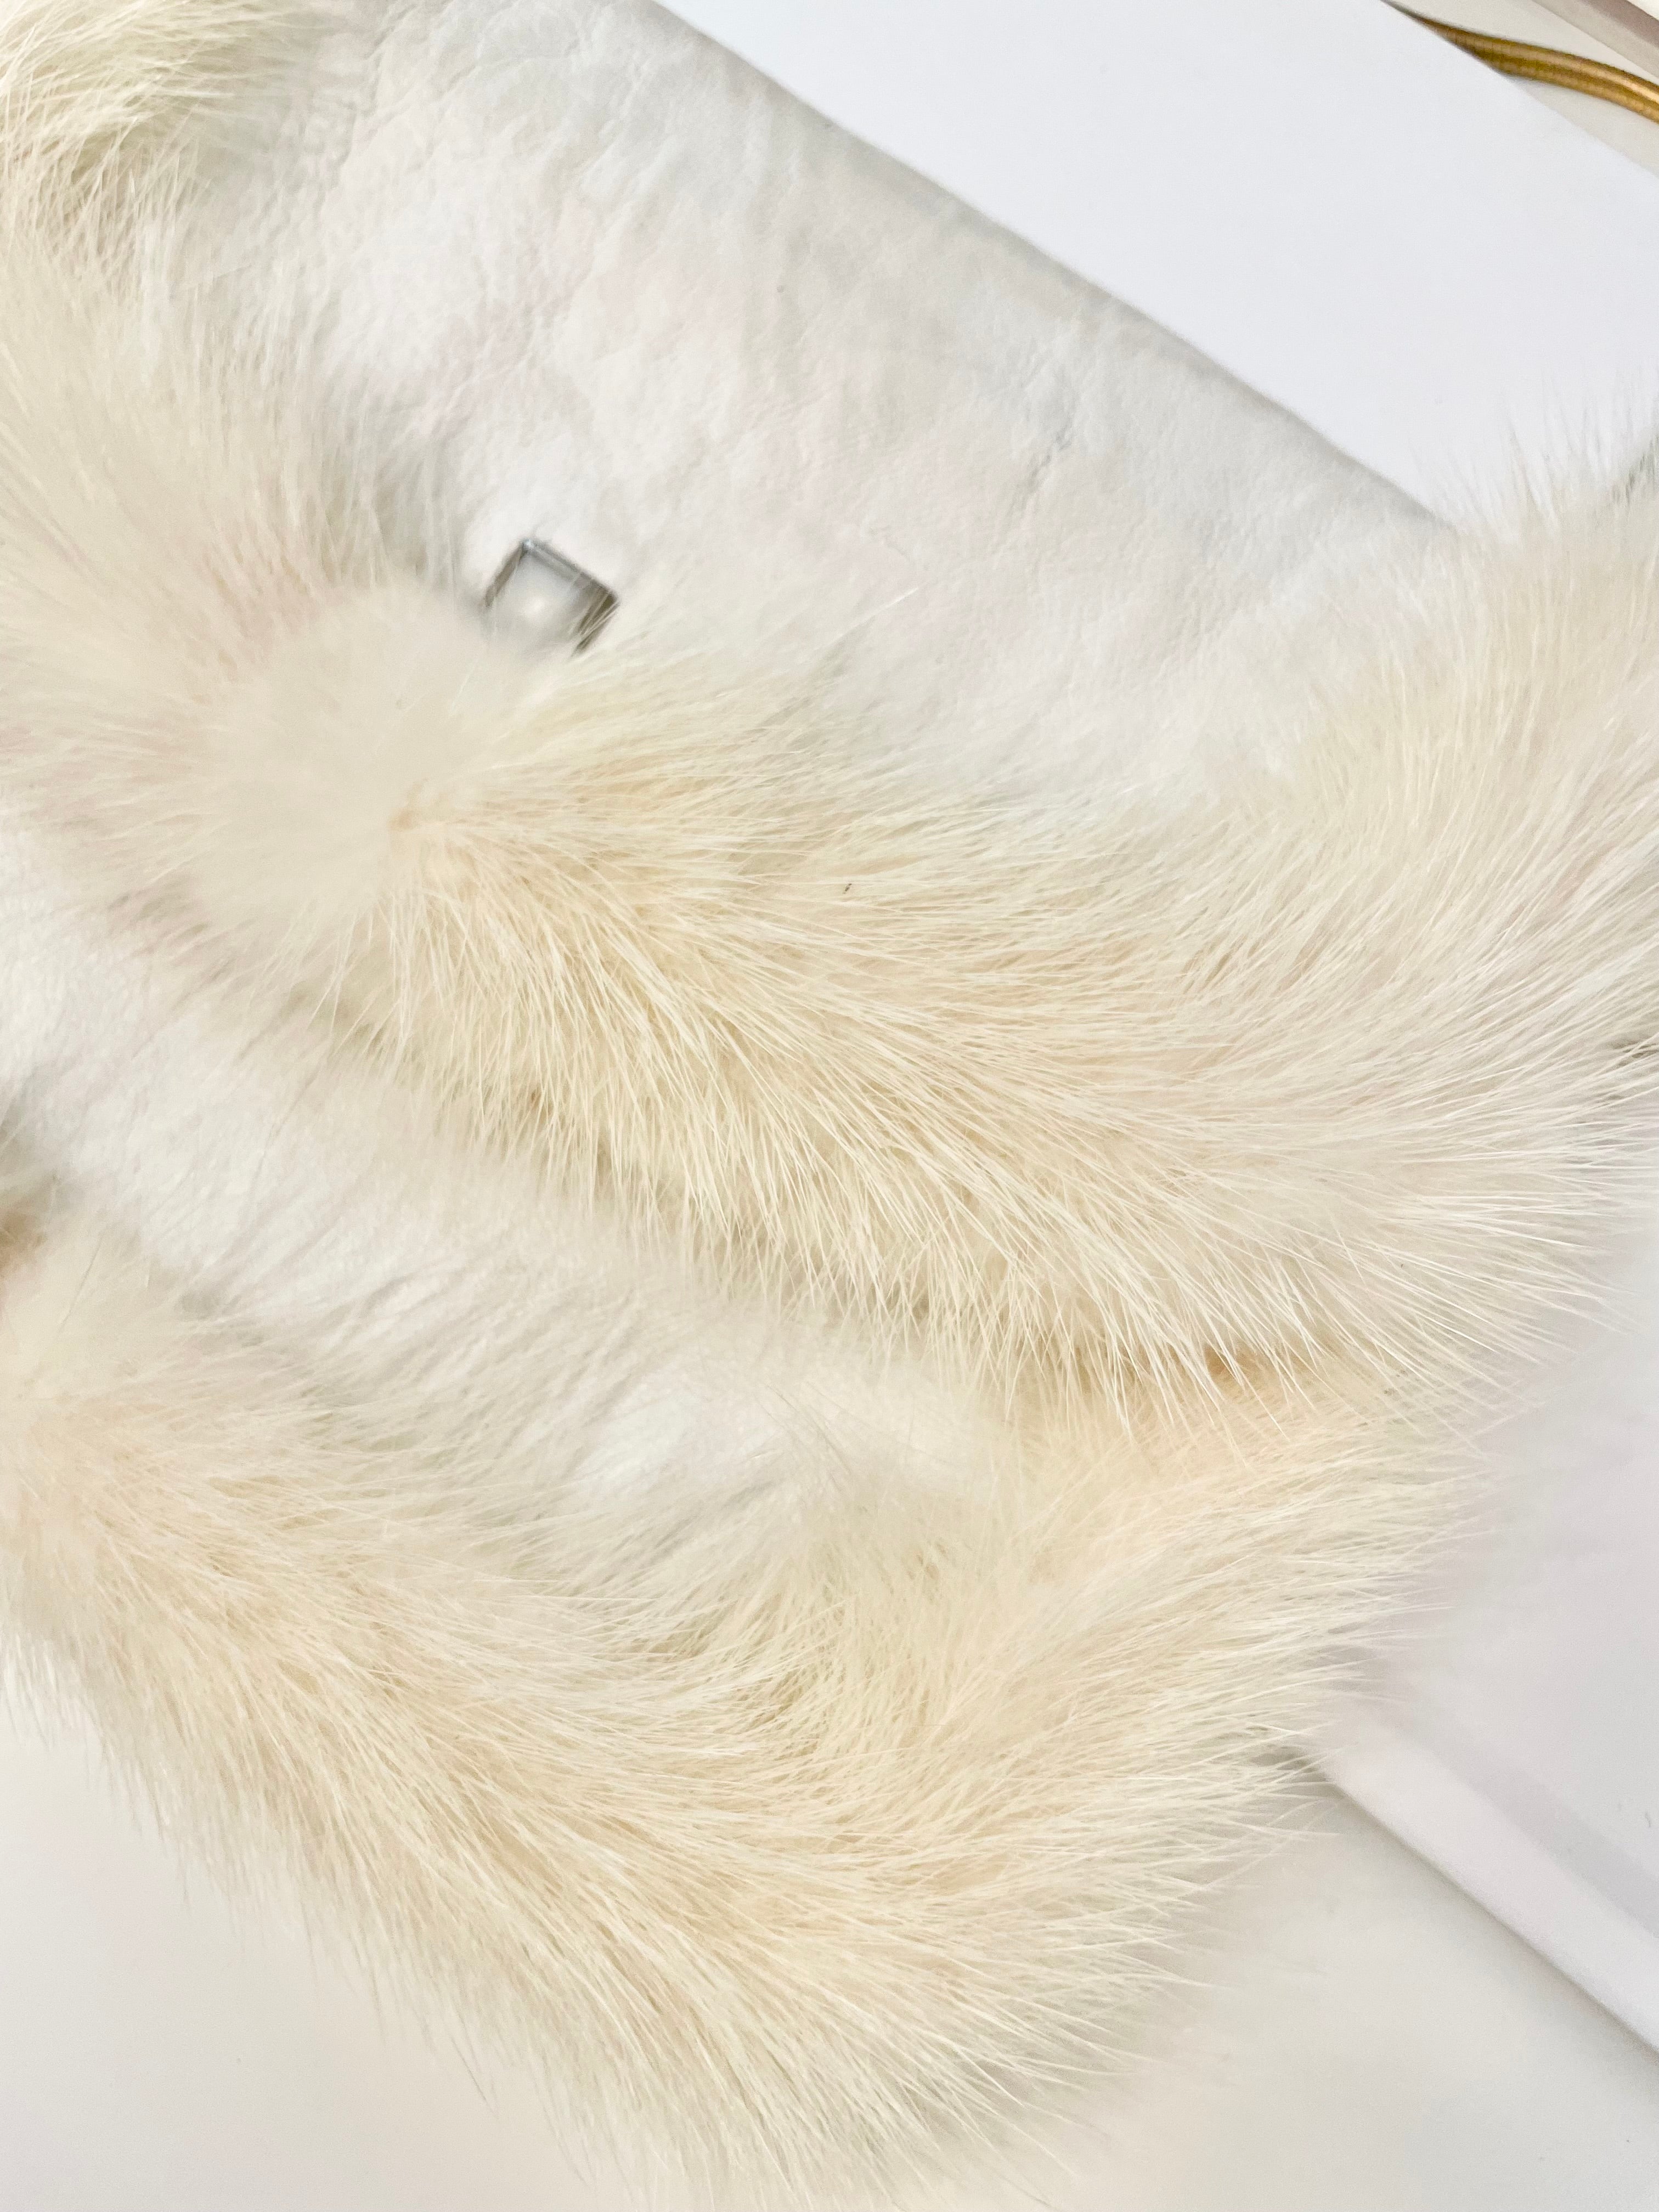 The 1960's heiress adores a fur clutch bag.... this one is so glamorous!